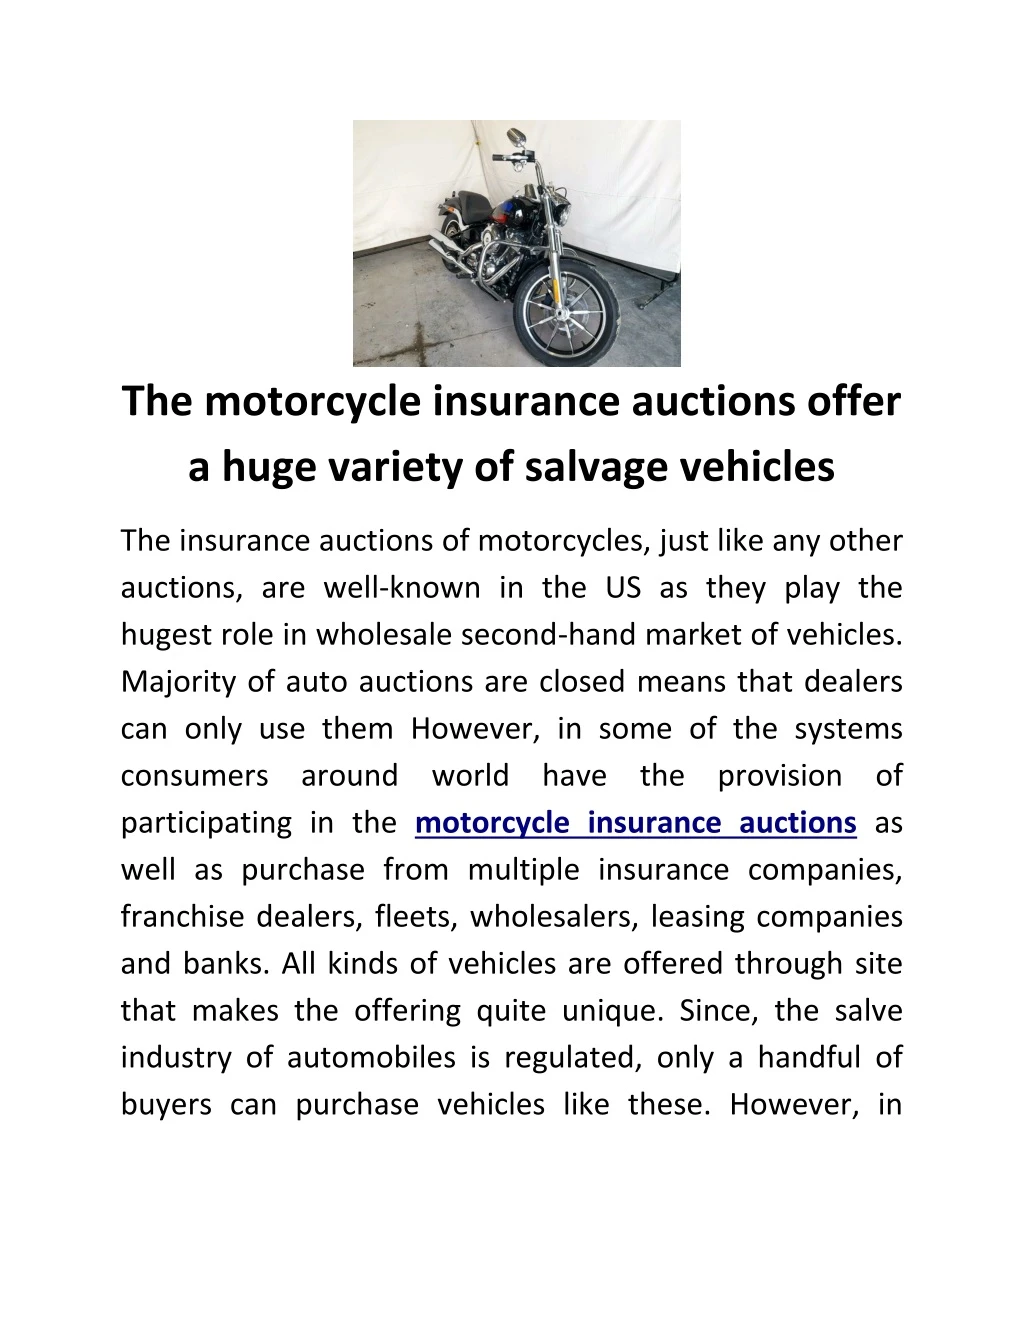 the motorcycle insurance auctions offer a huge